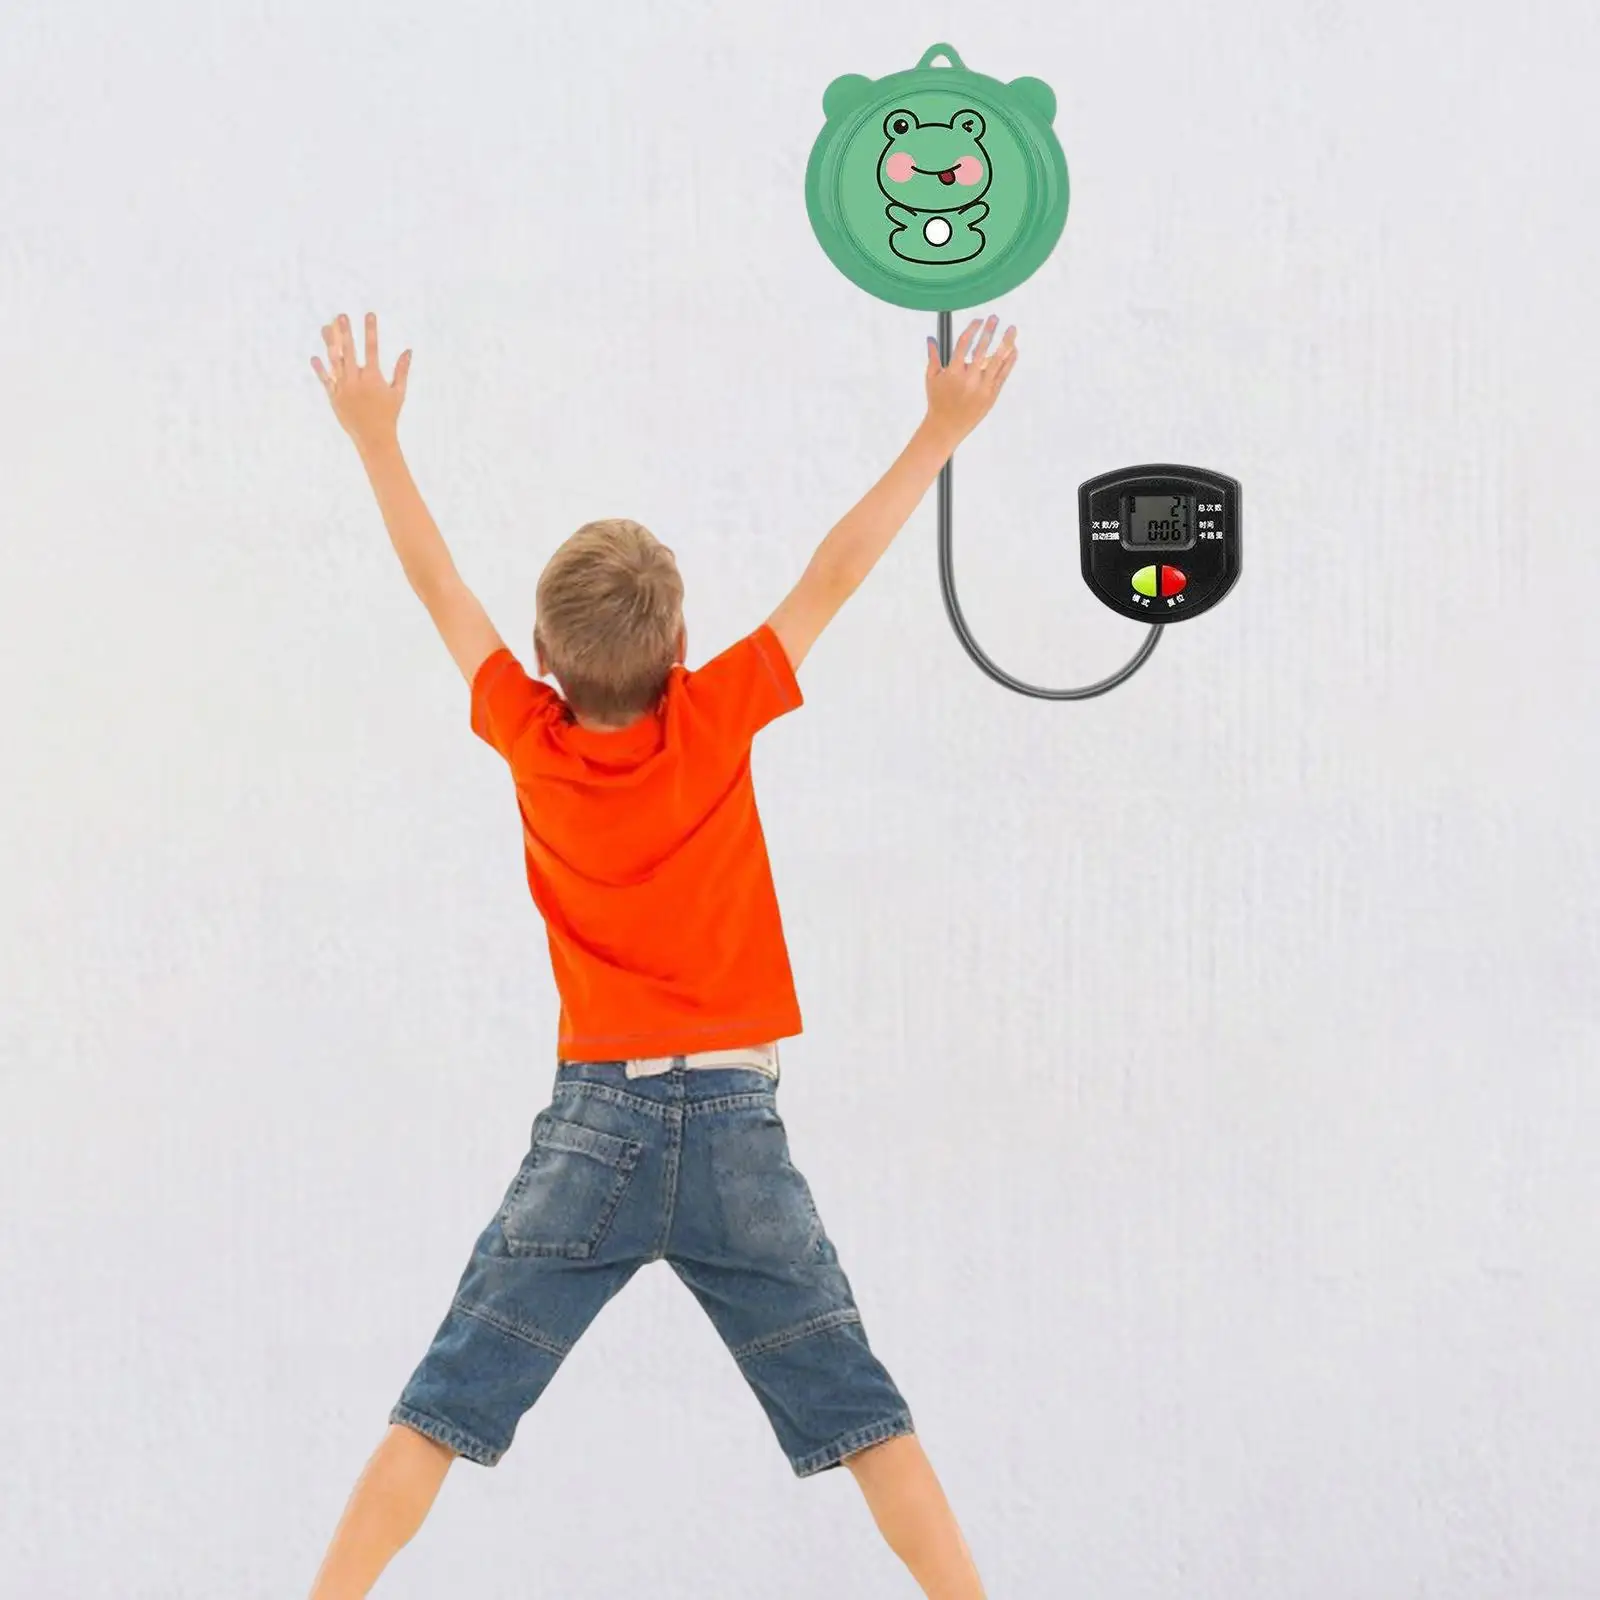 Jump Training Kids Equipment Living Room Bedroom Touch Jump High Counter